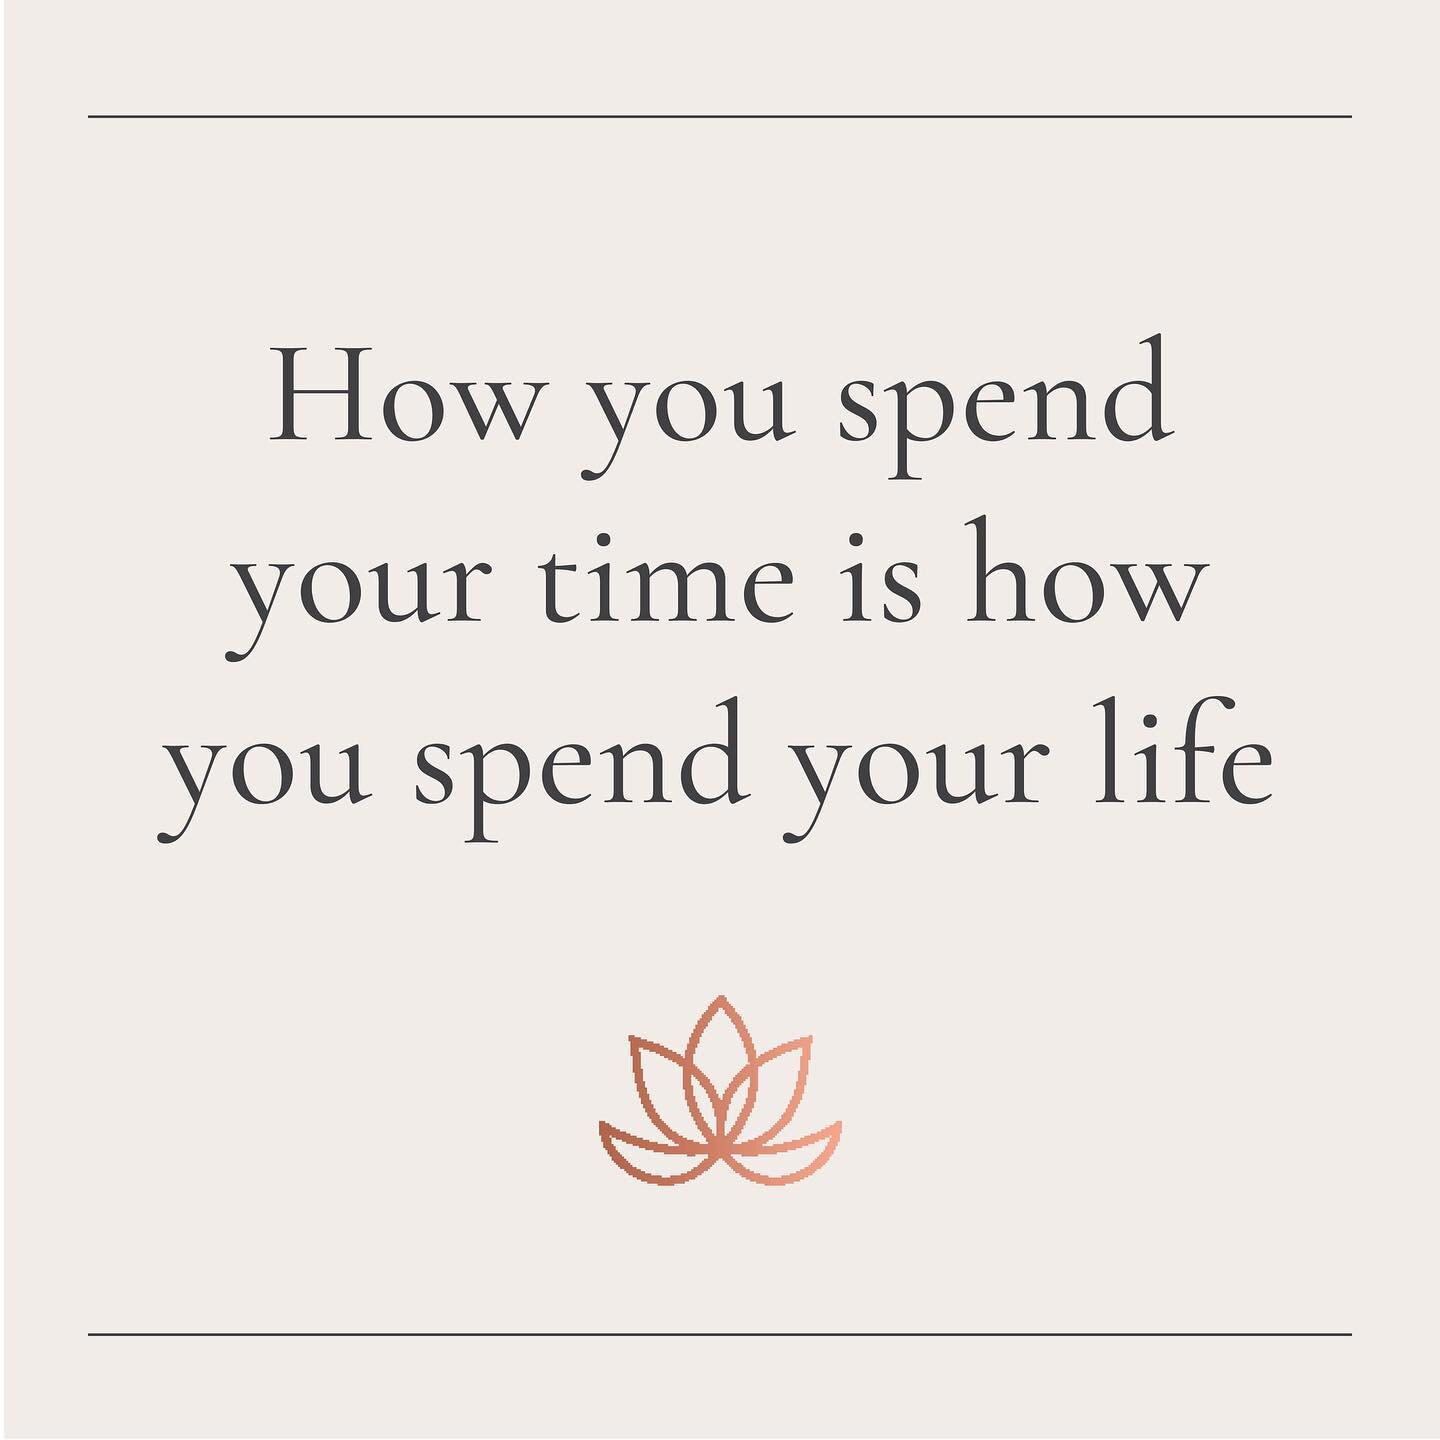 &ldquo;How you spend your time is how you spend your life&rdquo; - Annie Dillard

We often think it&rsquo;s the big things that steer the course of our life but really it&rsquo;s all the small, day-to-day actions and intentions we create that shape o